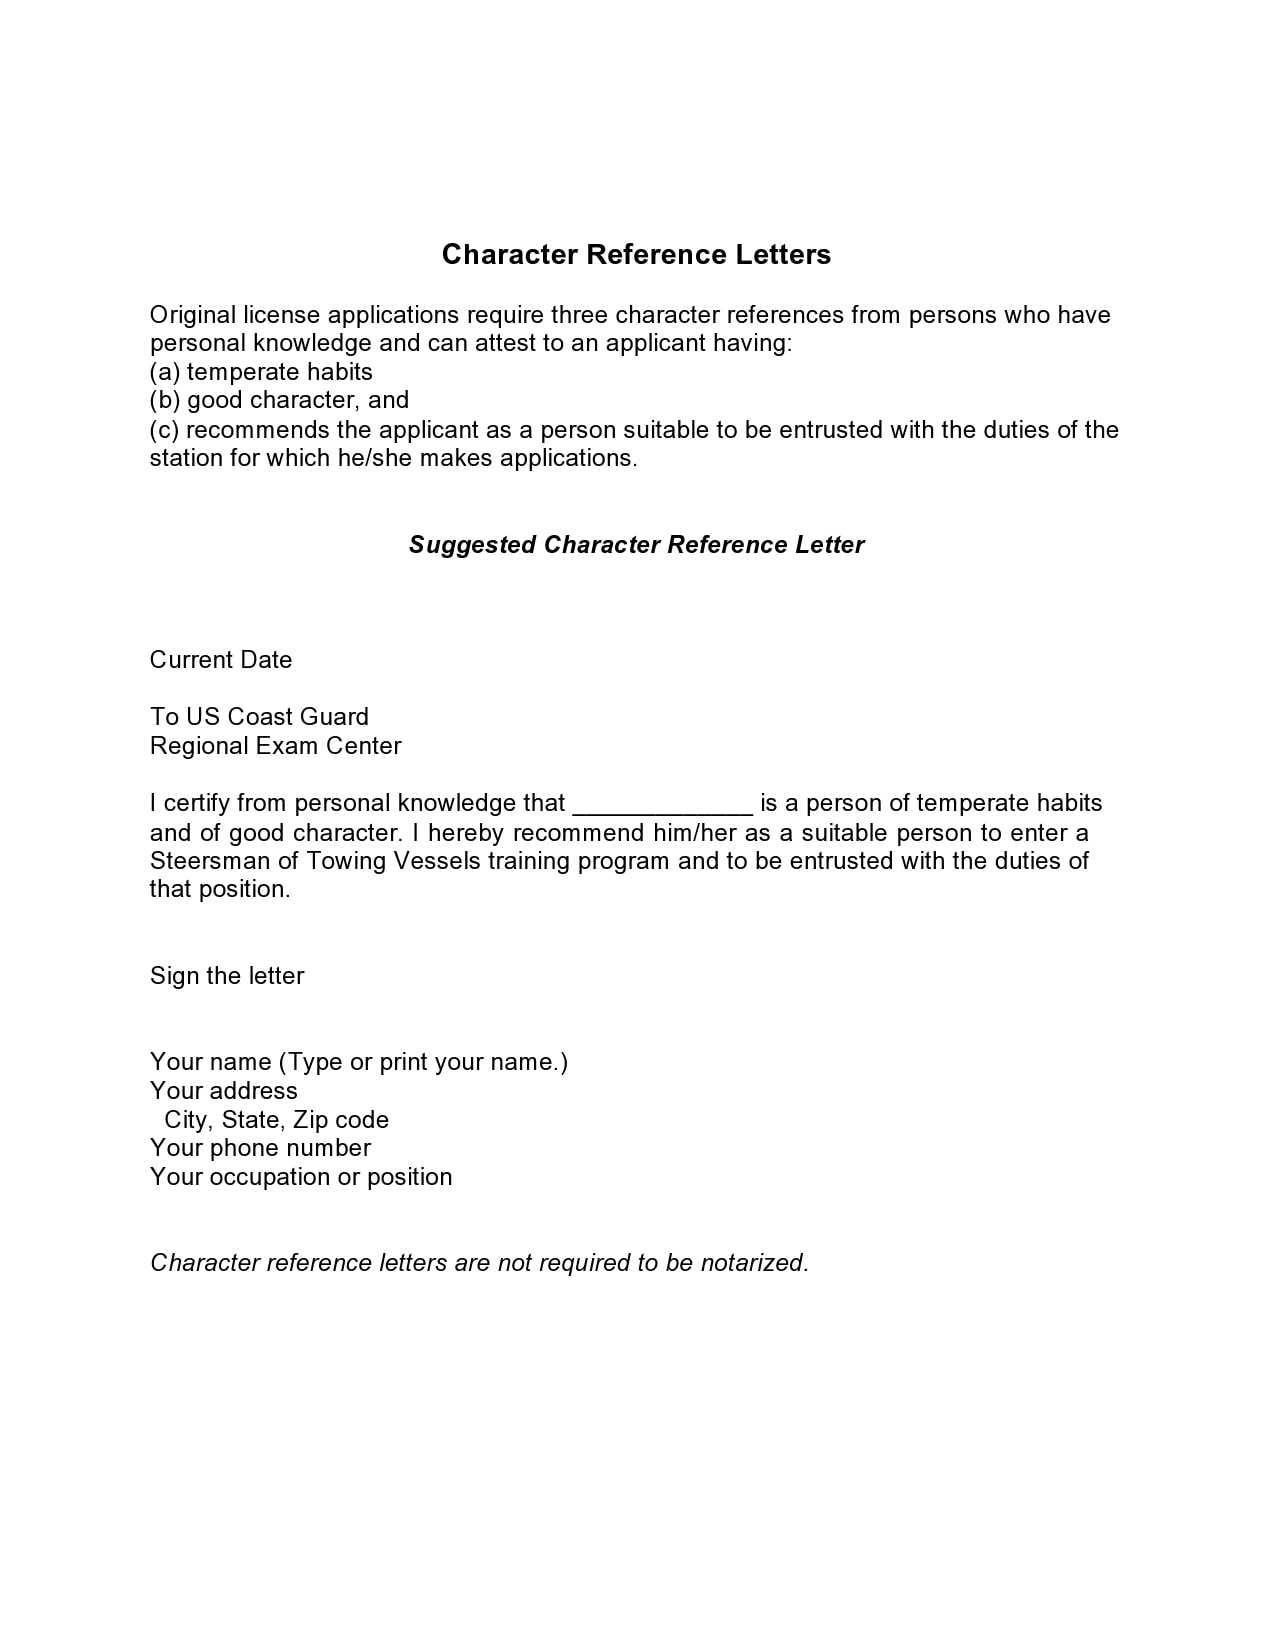 Personal Reference Letter Examples from templatearchive.com